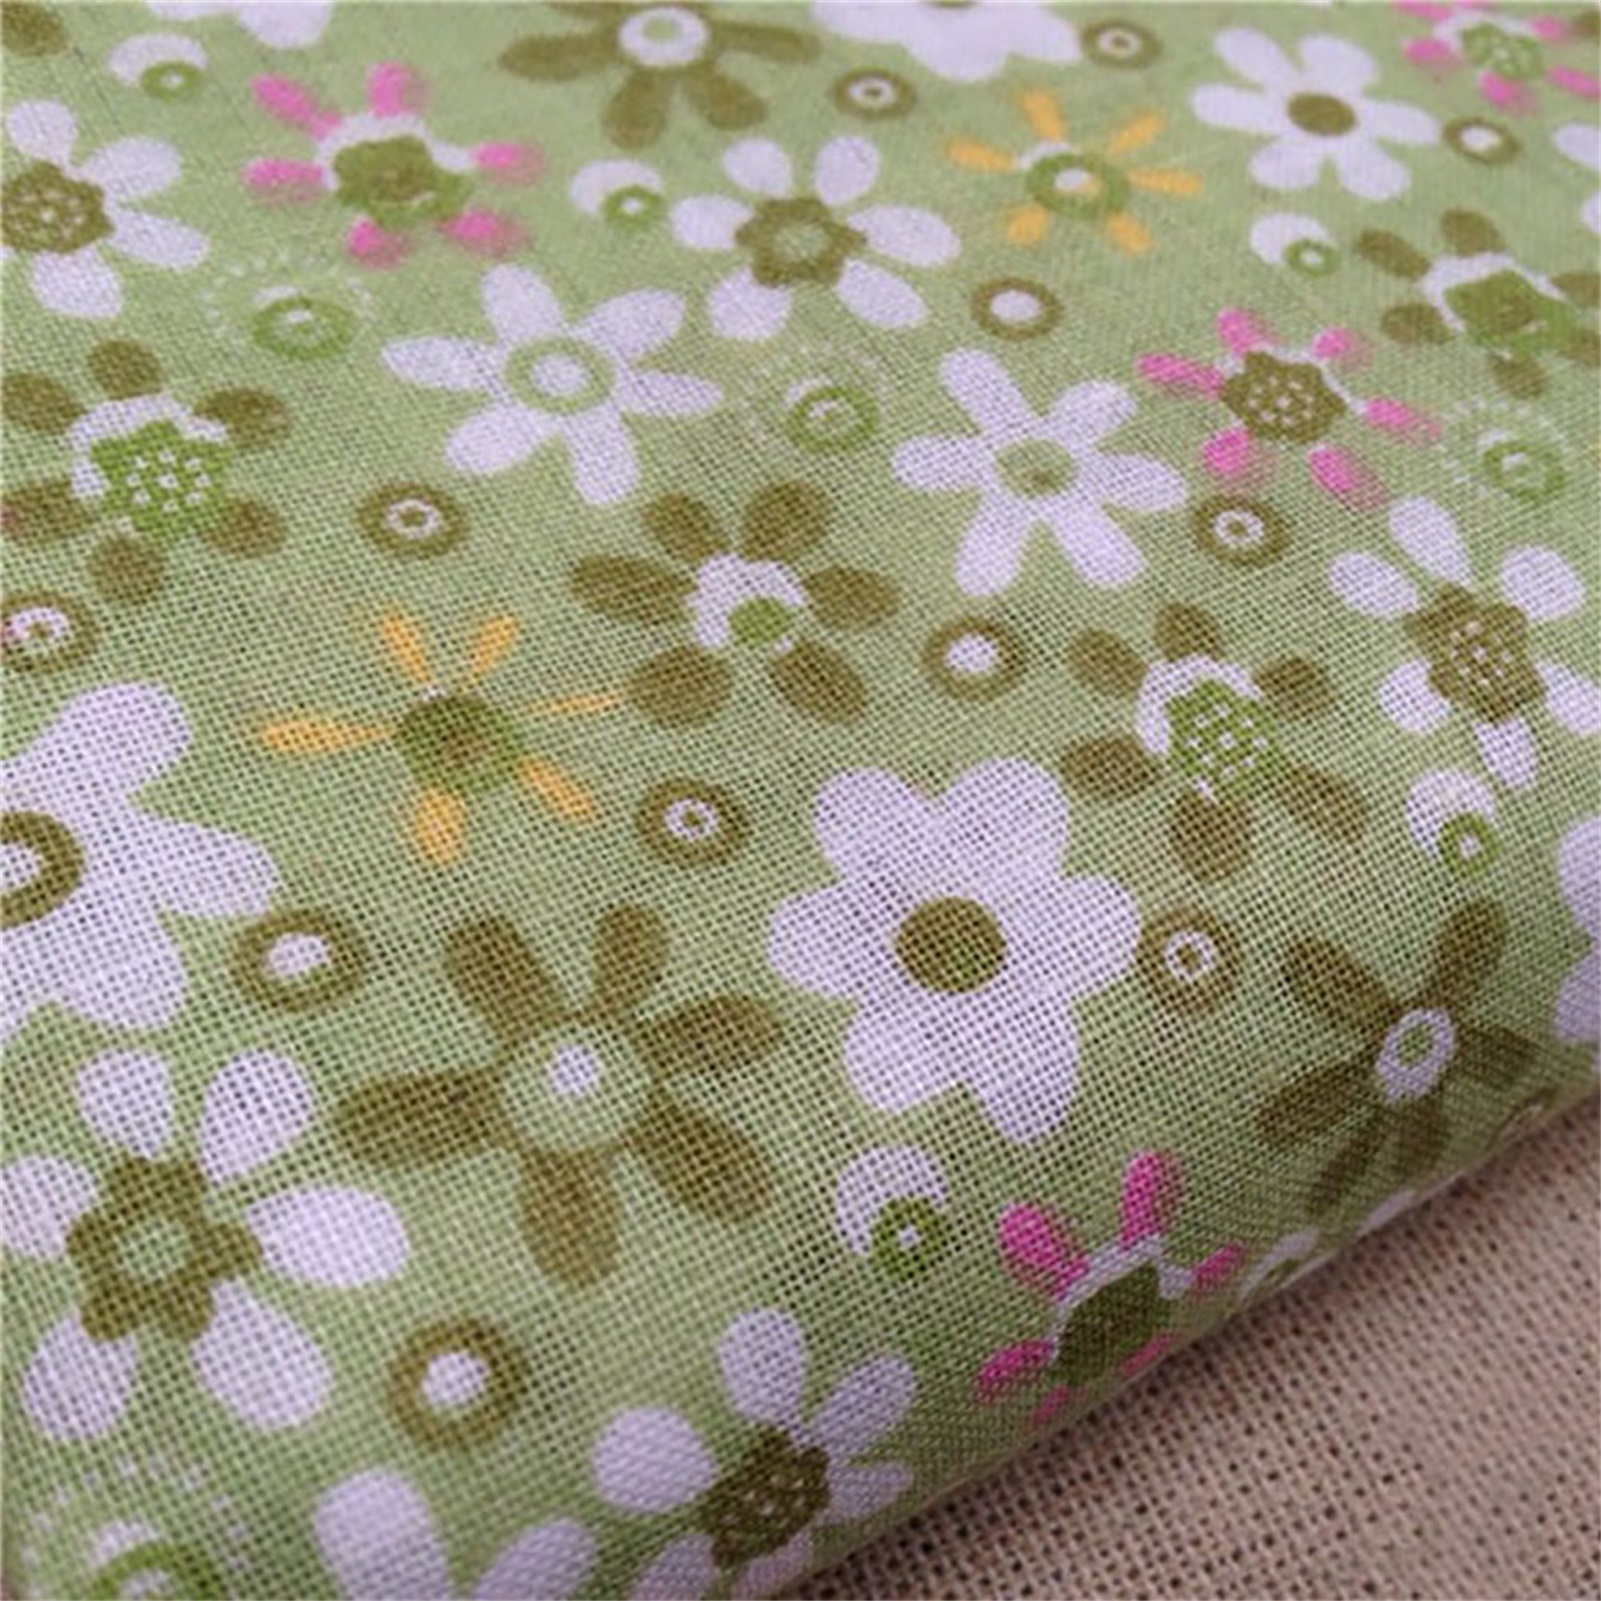 SPRING PARK 7Pcs/Set Soft Floral Print Cotton Cloth Fabric Hand Craft Sewing Material for DIY Handmade - image 4 of 7